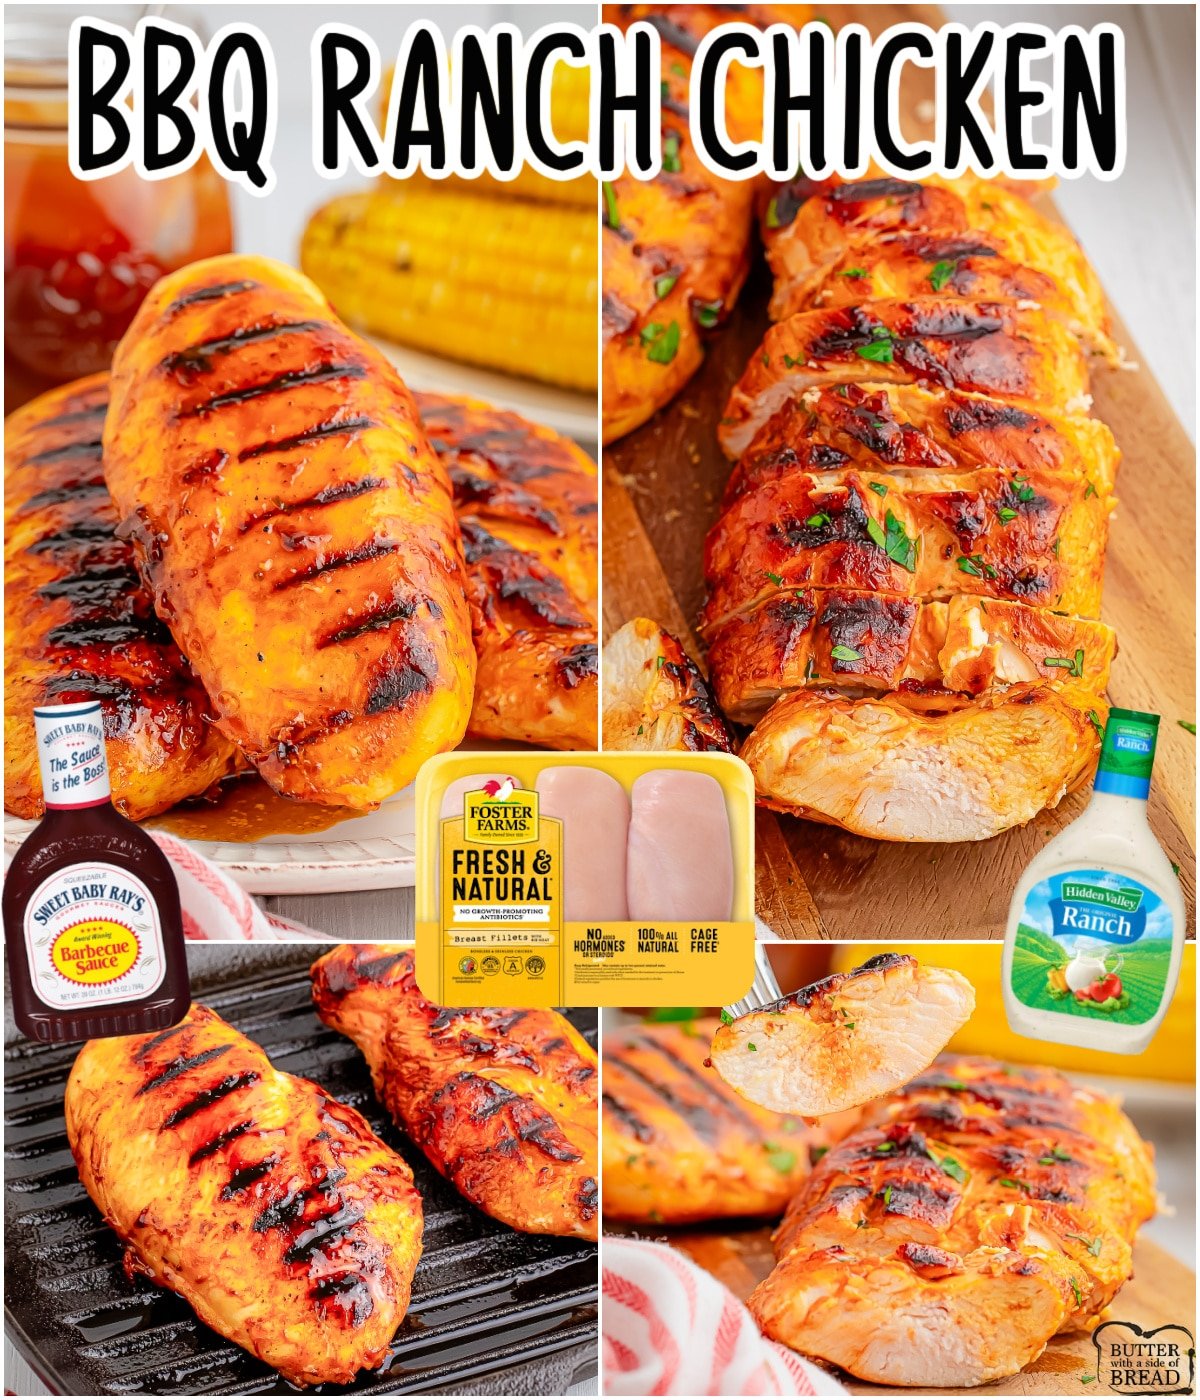 Grilled Ranch BBQ Chicken is a 3 ingredient dinner that's perfect for a summer barbecue! Ranch dressing & BBQ sauce combine for a mouth-watering marinade that infuses the chicken with fantastic flavor!